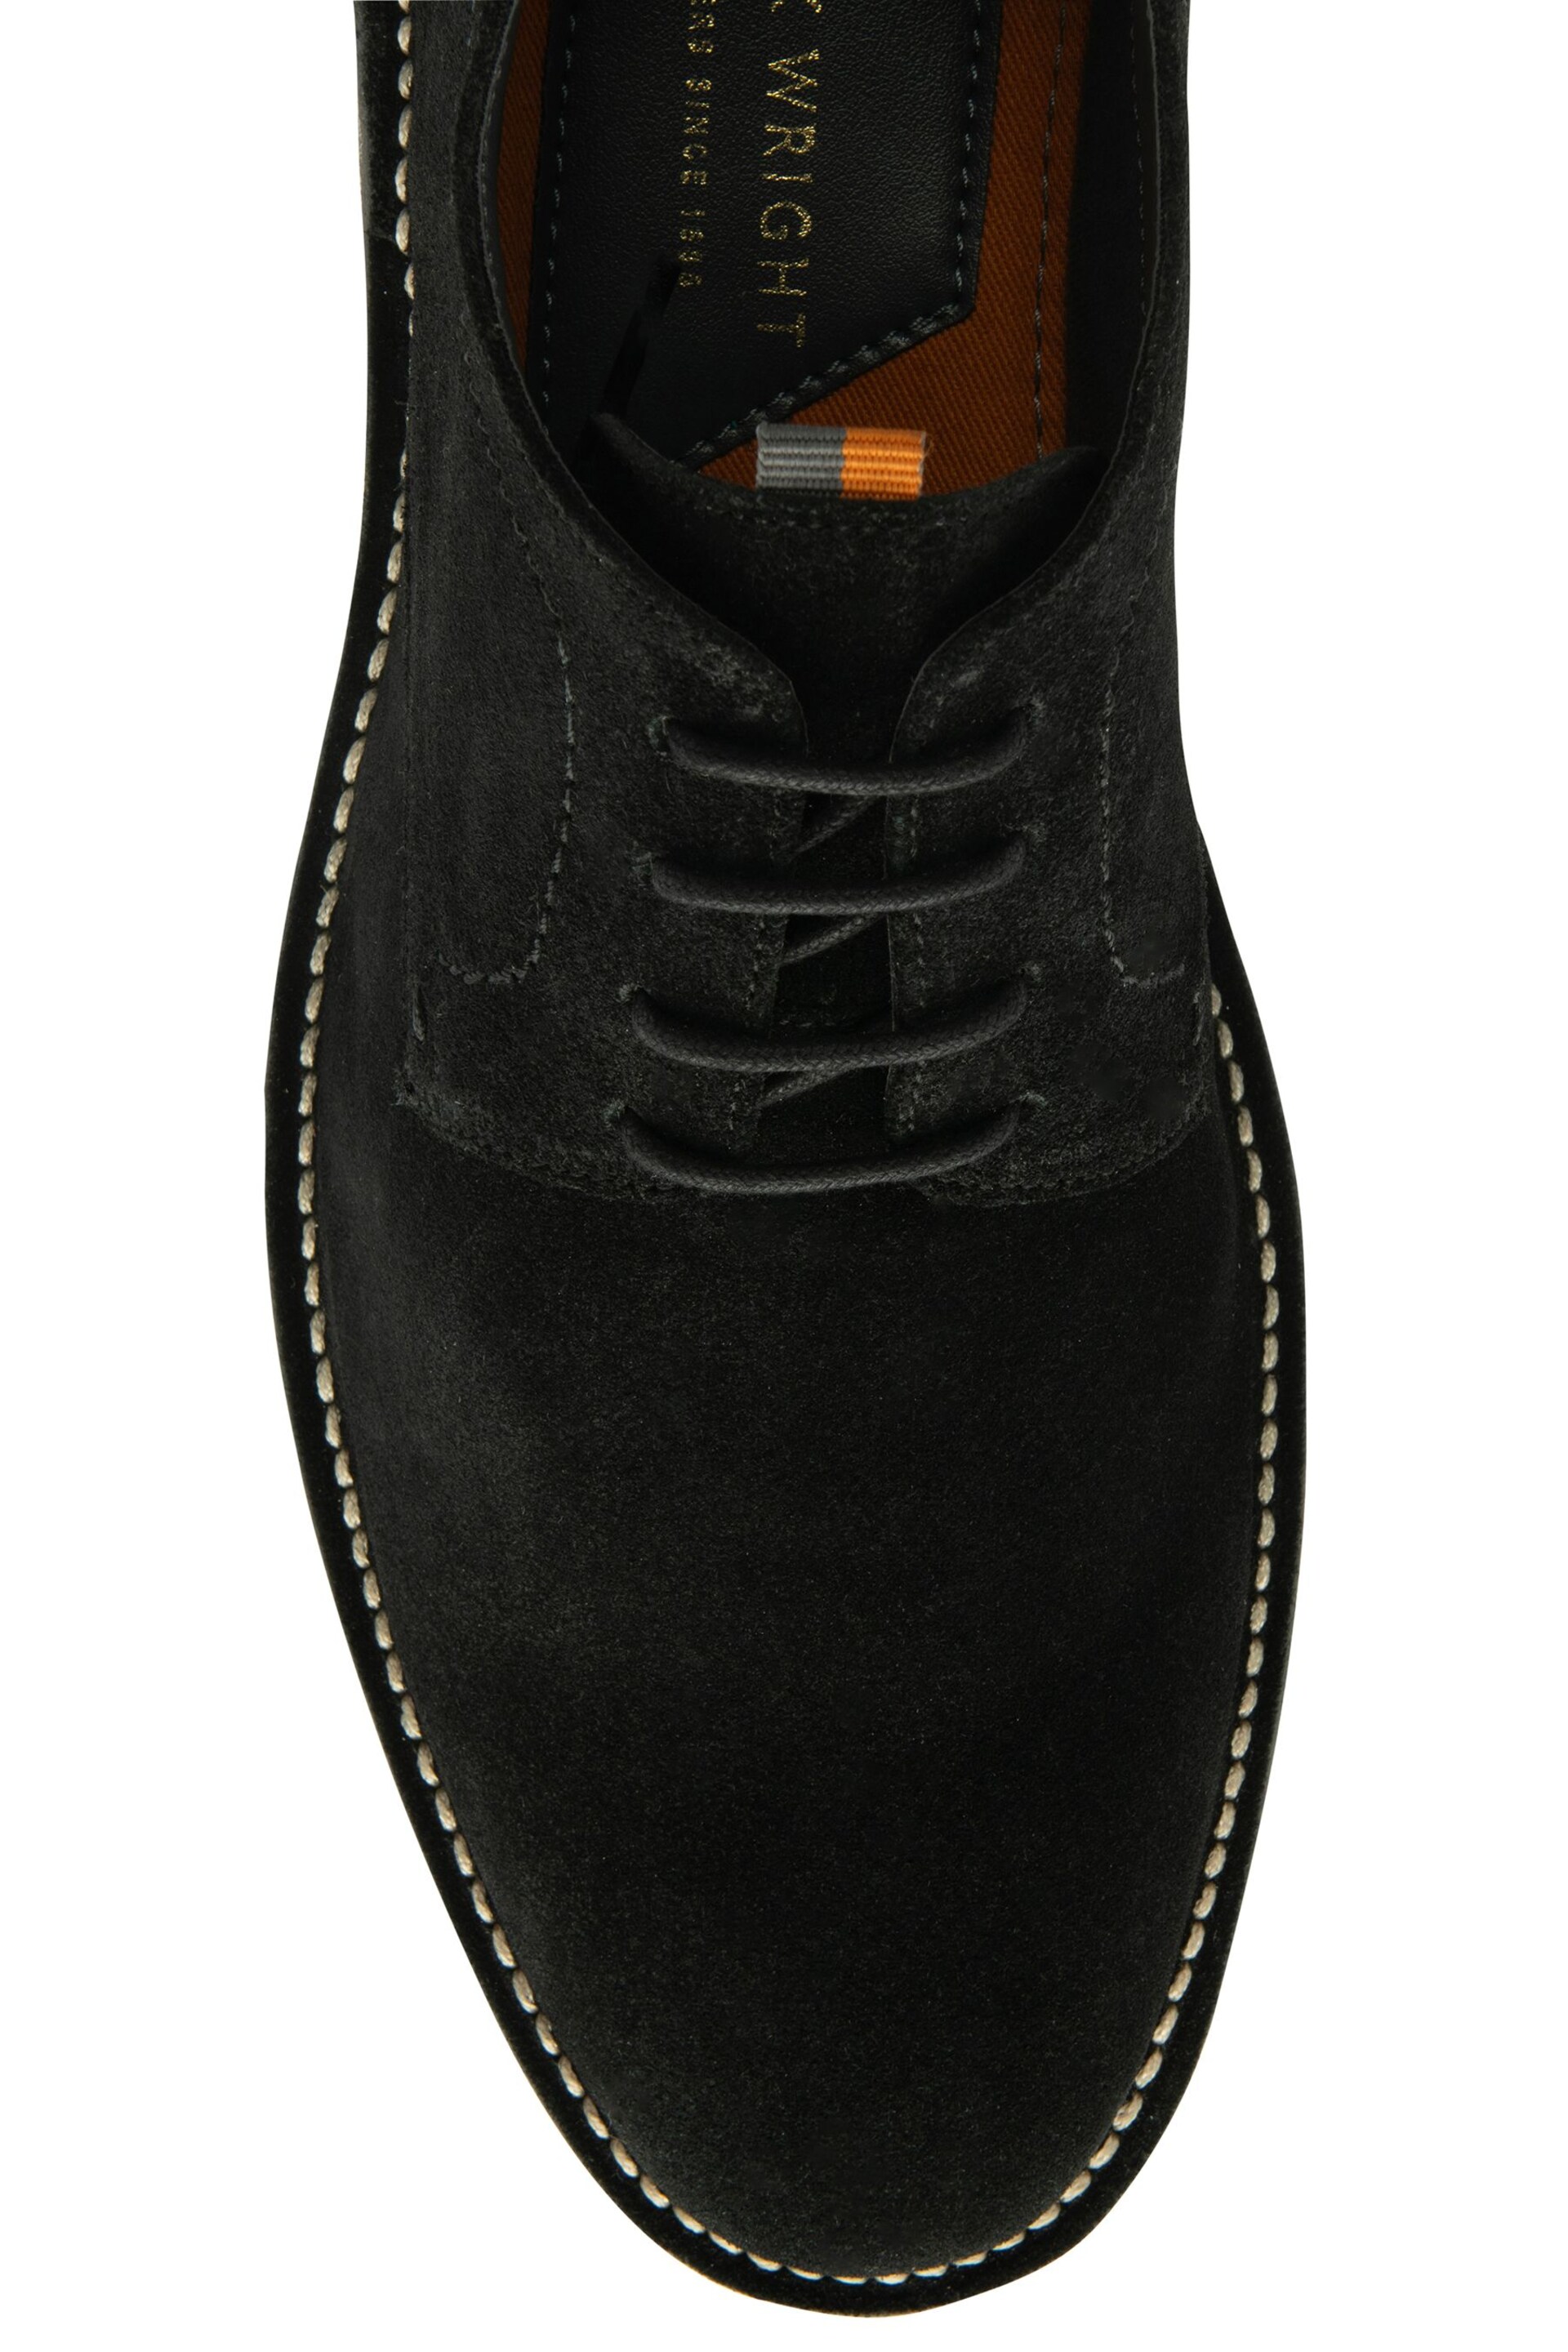 Frank Wright Black Suede Lace-Up Desert Mens Shoes - Image 4 of 4